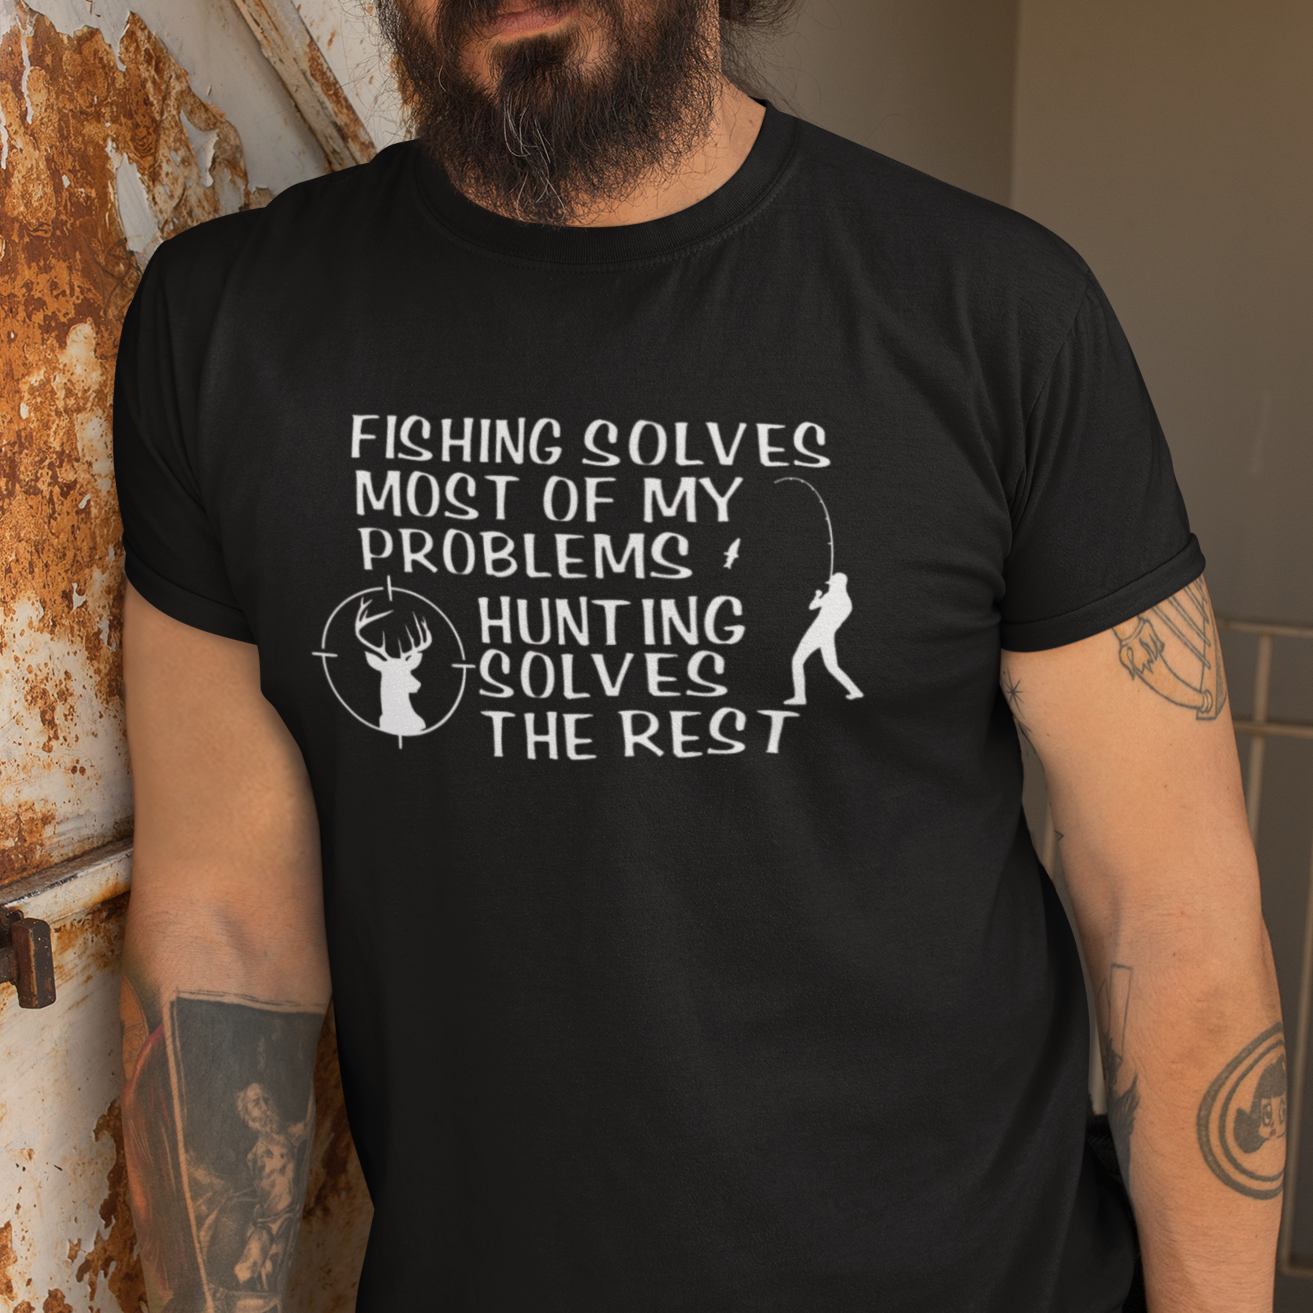 fishing-solves-most-of-my-problems-hunting-solves-the-rest-black-t-shirt-mockup-featuring-a-bearded-man-leaning-against-a-rusty-wall